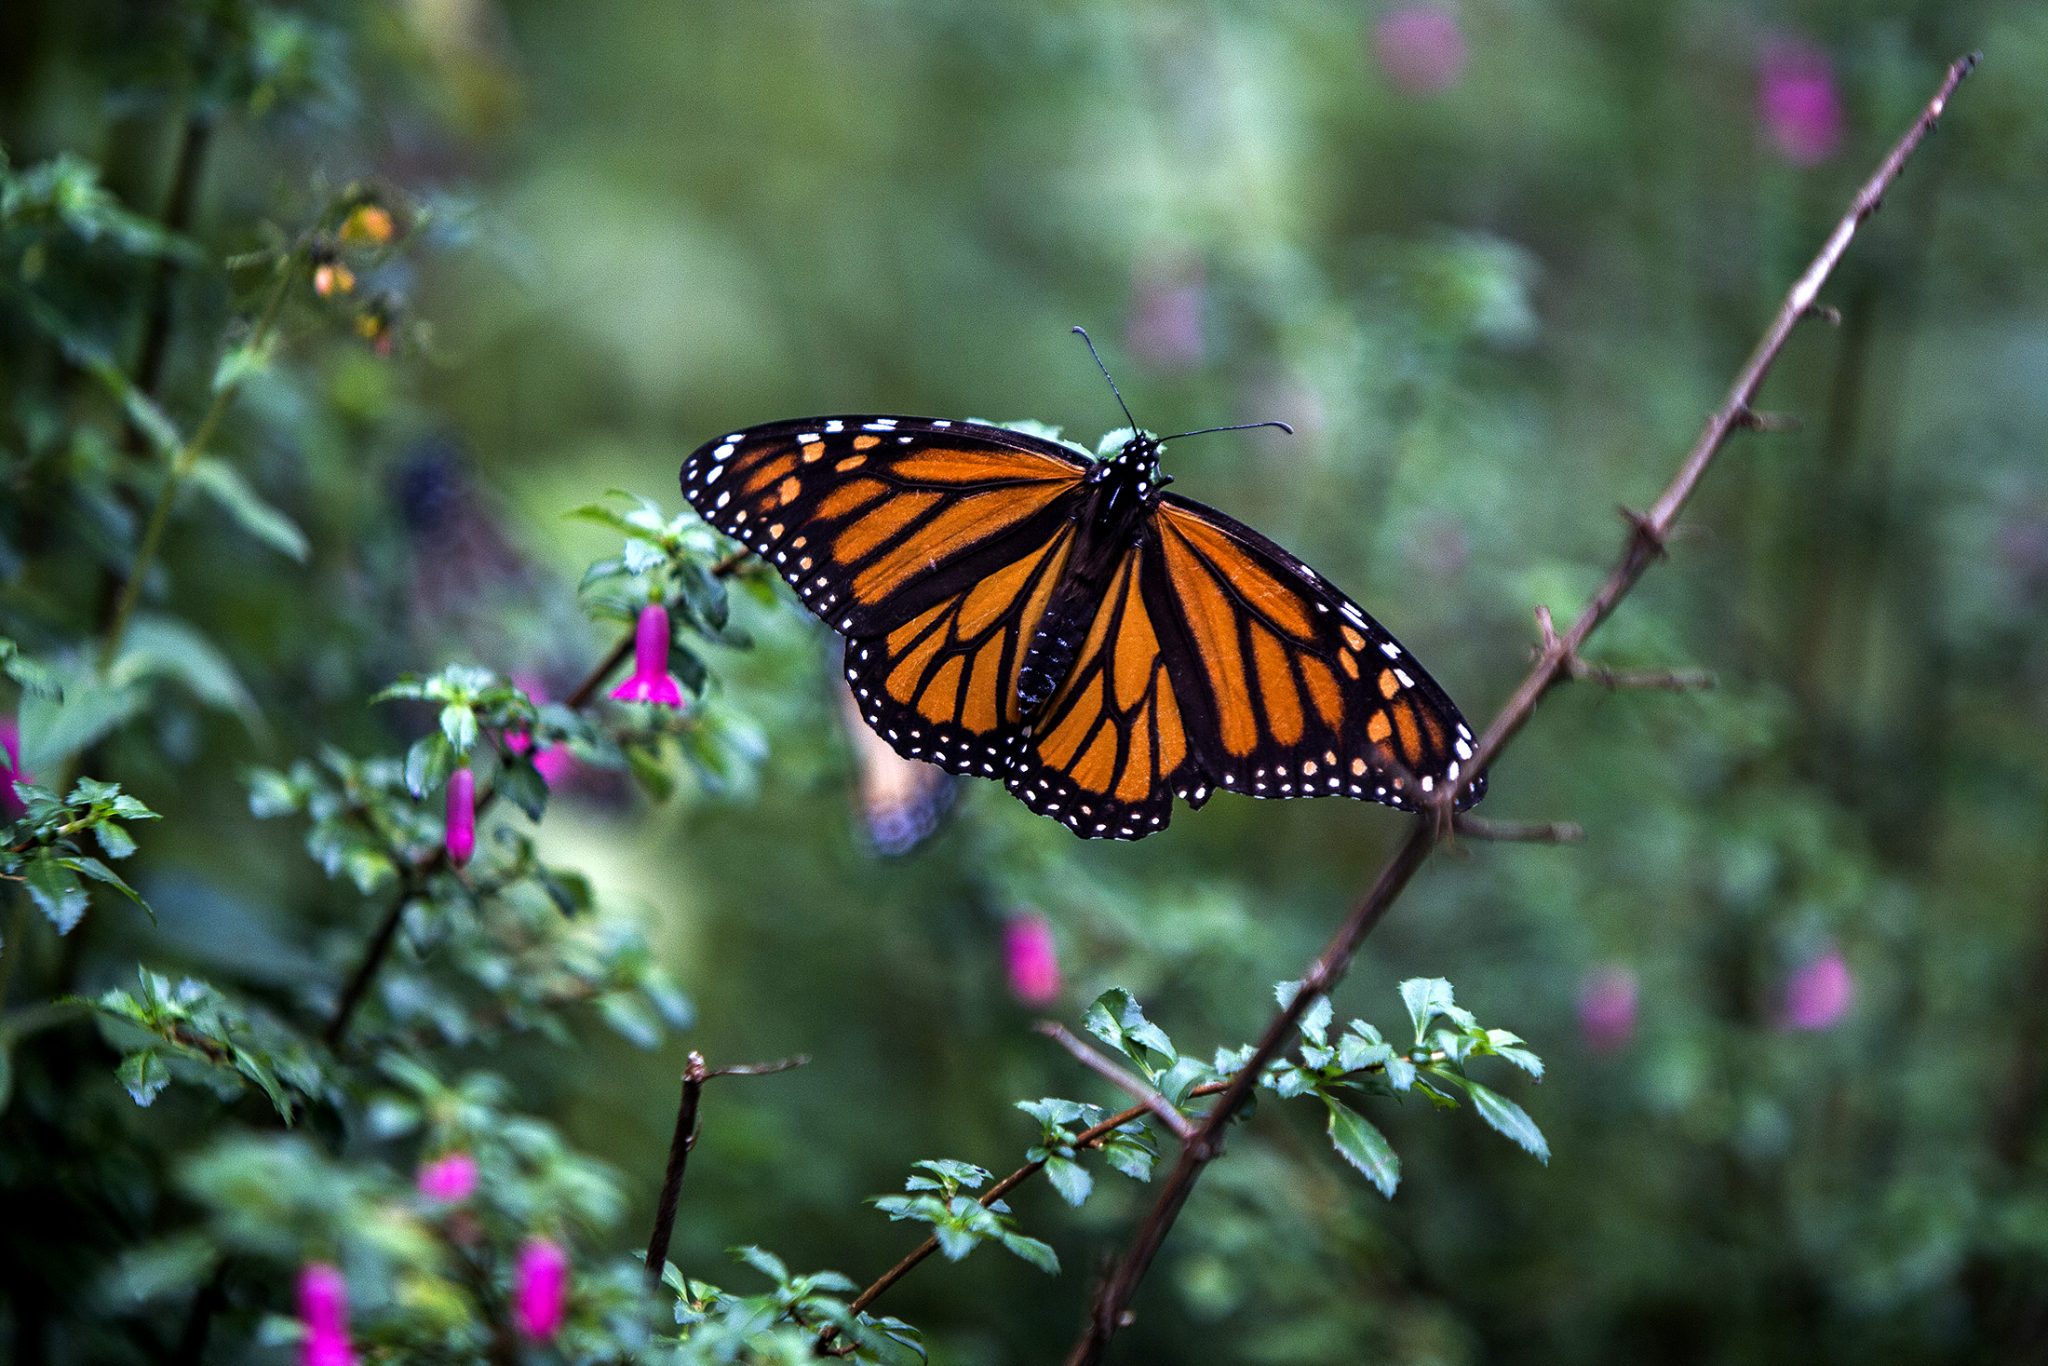 A Monarch butterfly (Danaus plexippus) is pictured at the oyamel firs (Abies religiosa) forest, in Ocampo municipality, Michoacan State in Mexico on December 19, 2016.  Millions of monarch butterflies arrive each year to breed at the oyamel firs forest in Michoacan State, after travelling more than 4,500 kilometres from the United States and Canada. / AFP PHOTO / ENRIQUE CASTRO